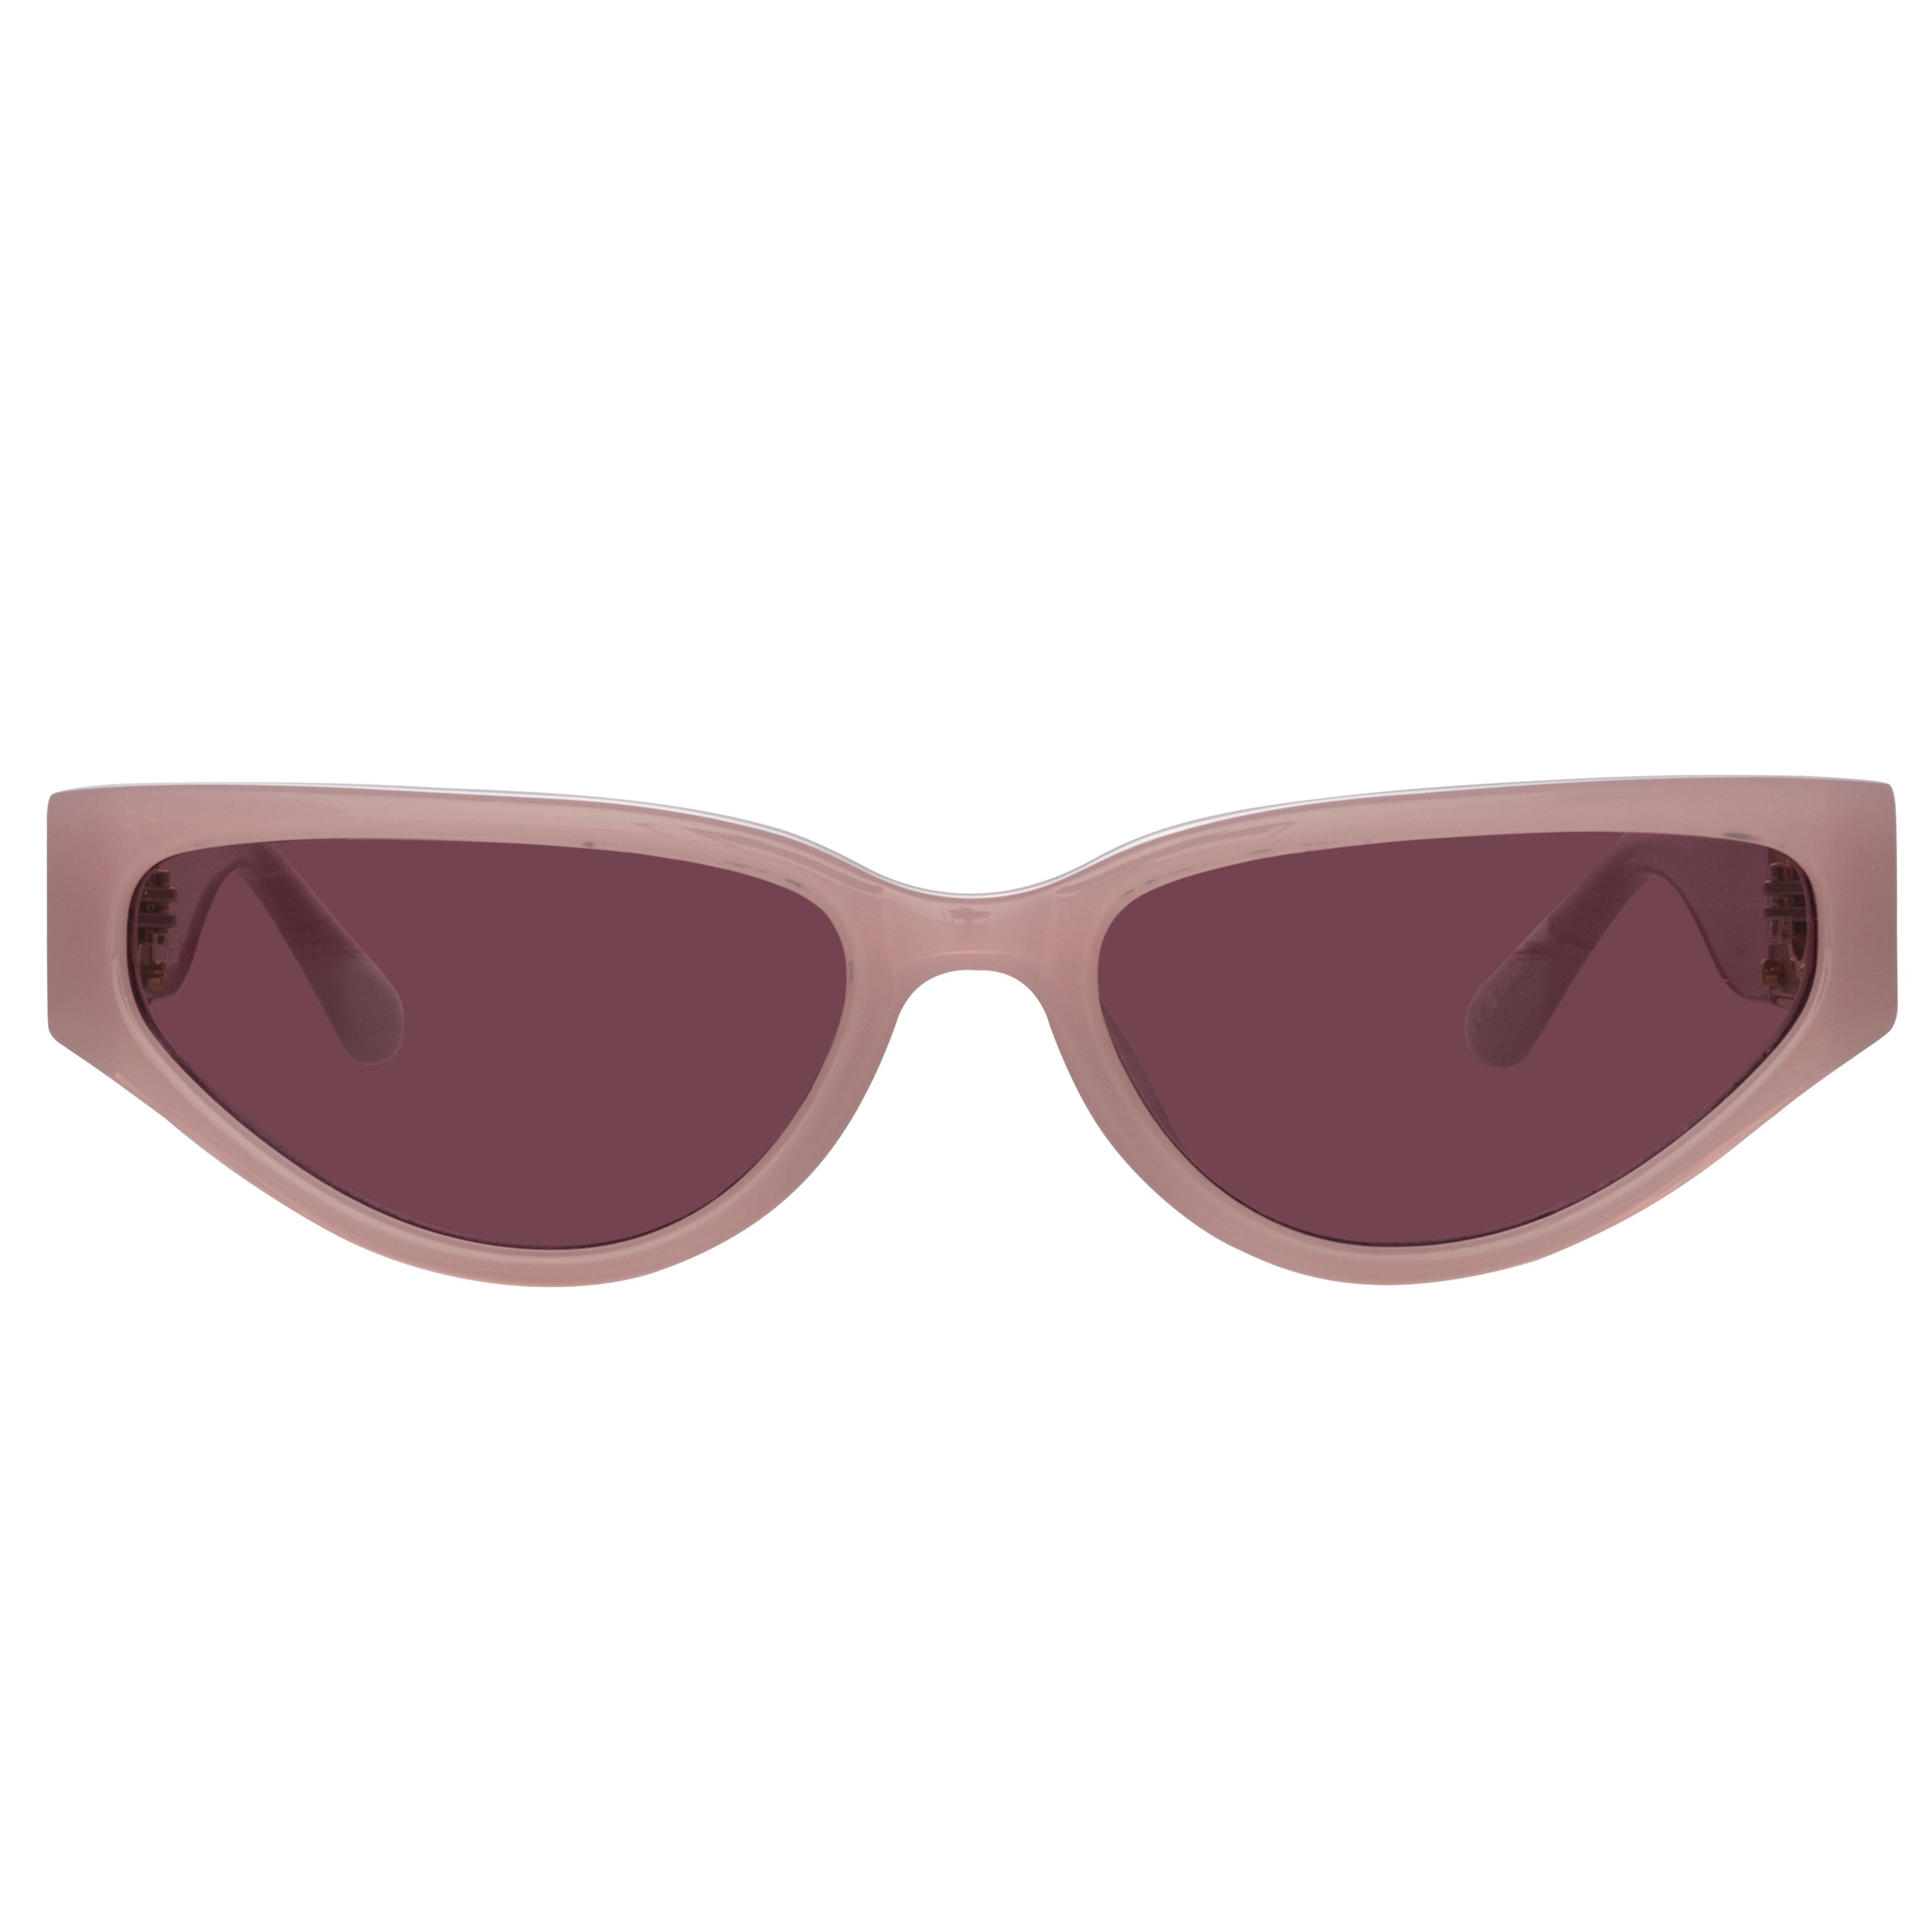 TOMIE CAT EYE SUNGLASSES IN LILAC - 1